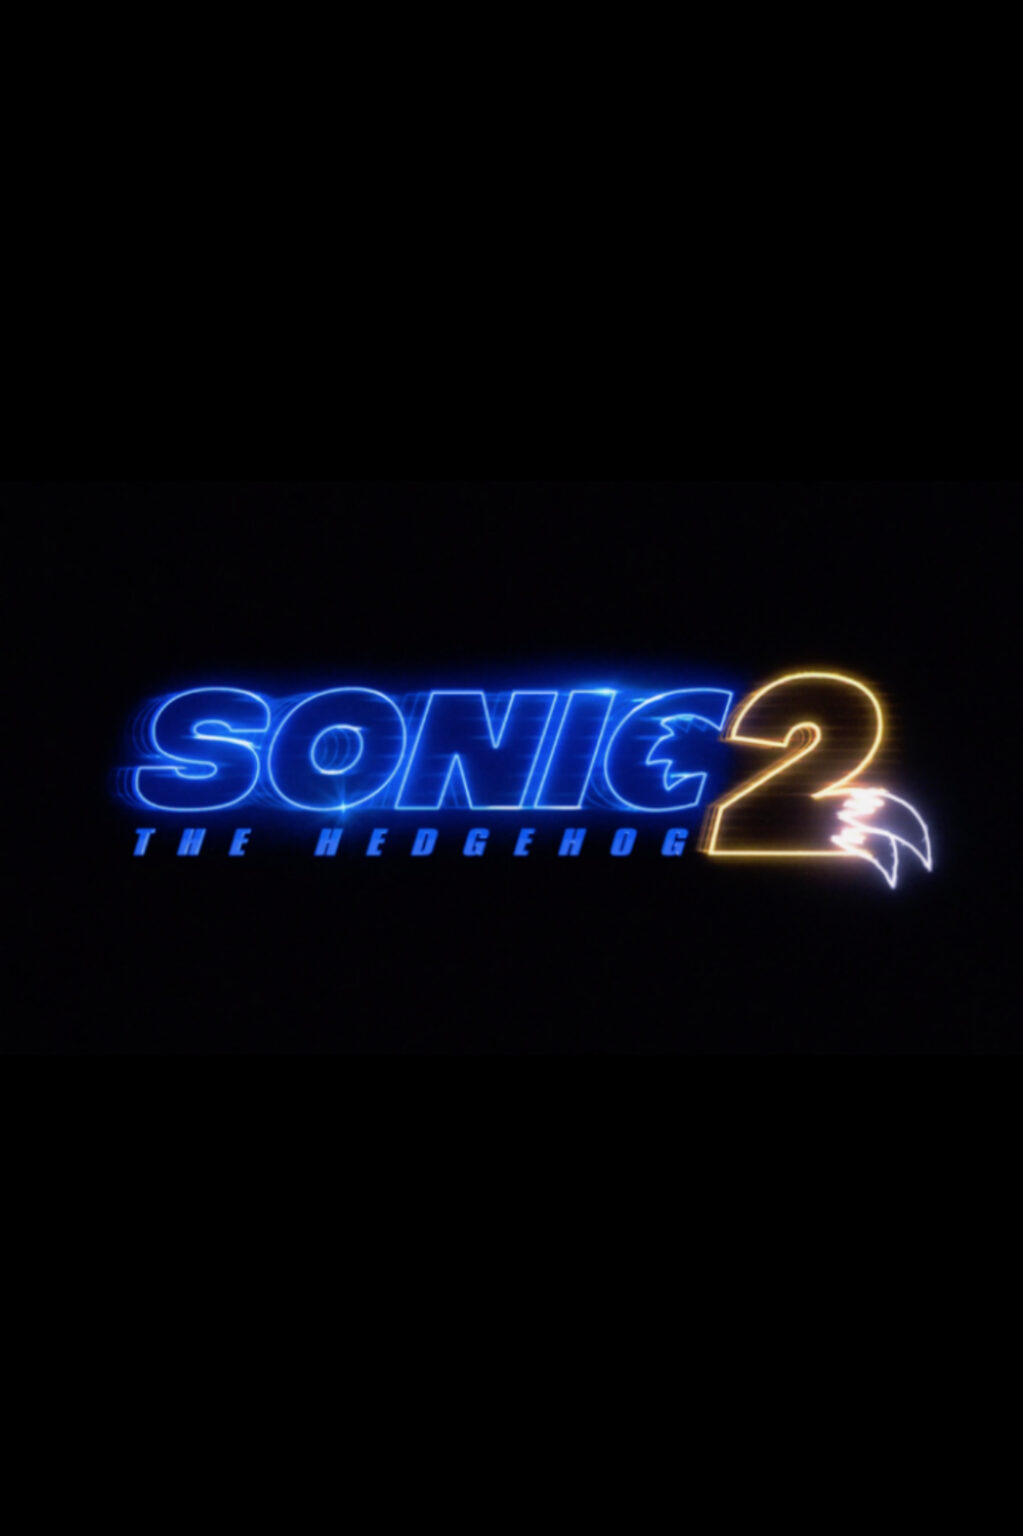 Thanks to a slew of set photos, we now know that Knuckles the Echidna will be in 'Sonic the Hedgehog 2'! But did Paramount get his design right?